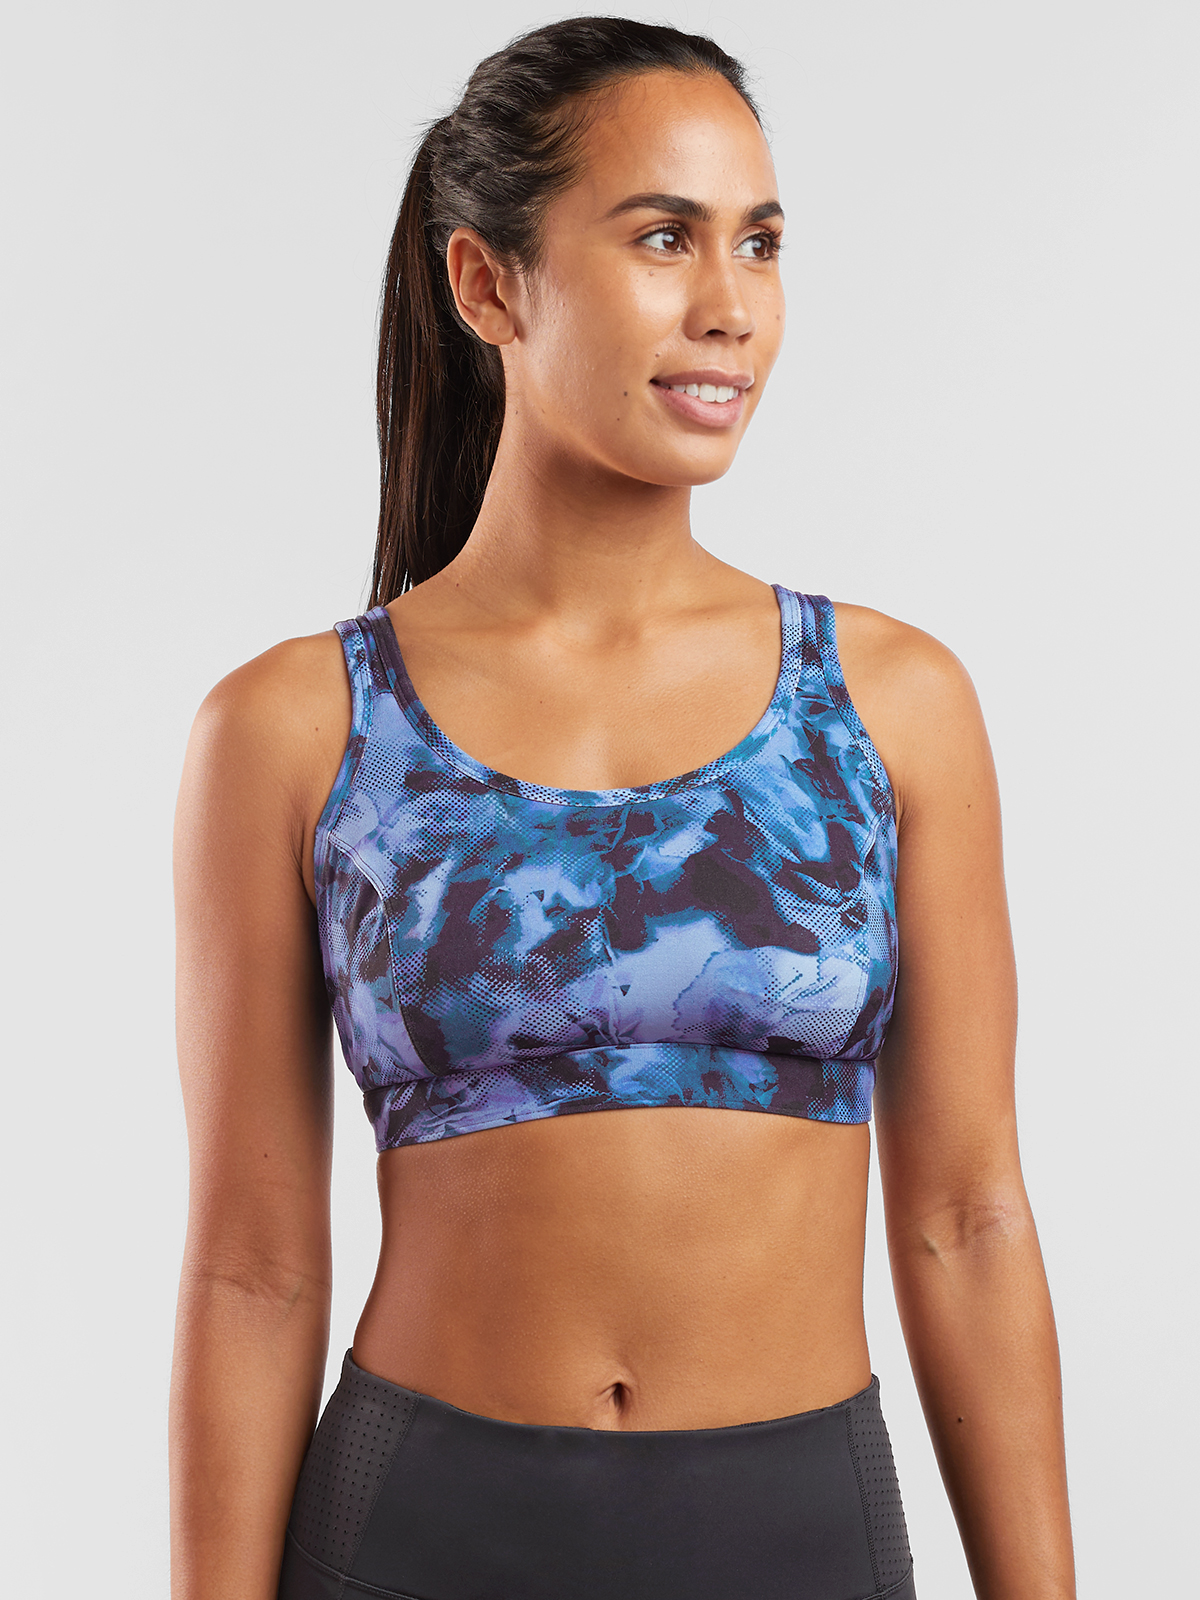 Champion turquoise small sports bra for gym, yoga - $11 - From Melinda